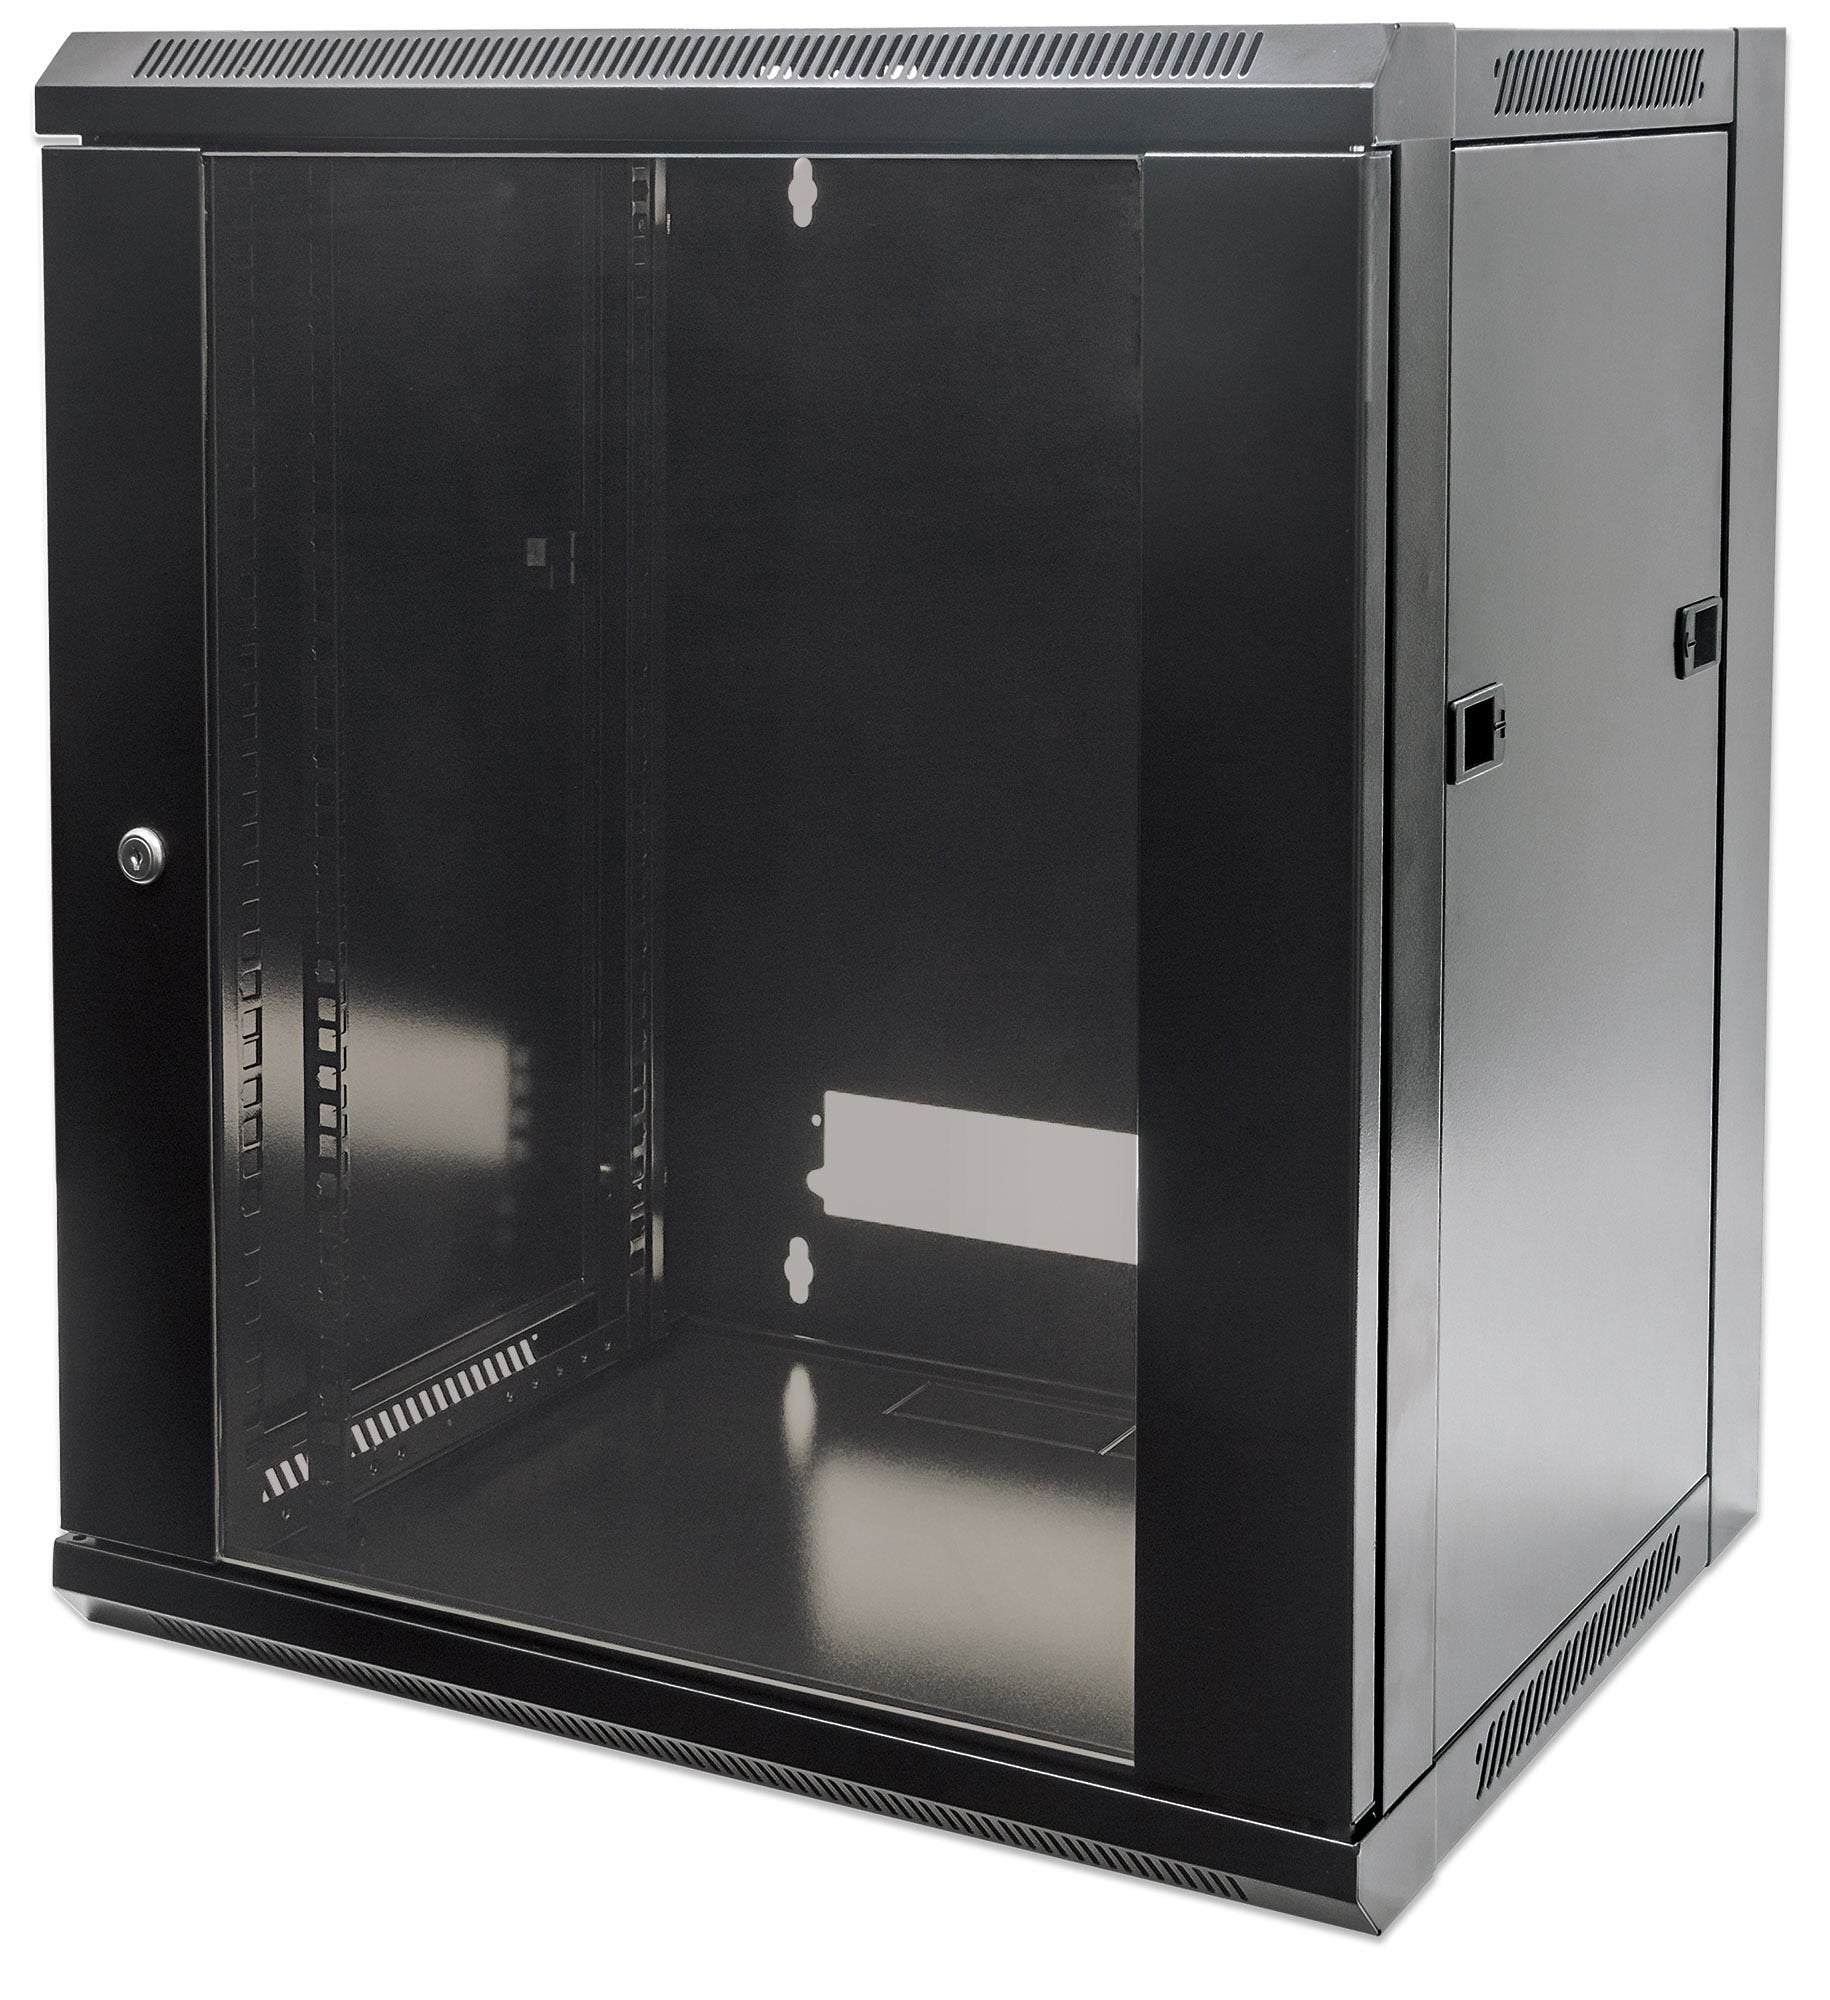 Intellinet Network Cabinet, Wall Mount (Standard), 12U, Usable Depth 260mm/Width 510mm, Black, Flatpack, Max 60kg, Metal & Glass Door, Back Panel, Removeable Sides,Suitable also for use on desk or floor, 19",Parts for wall install (eg screws/rawl plugs) n